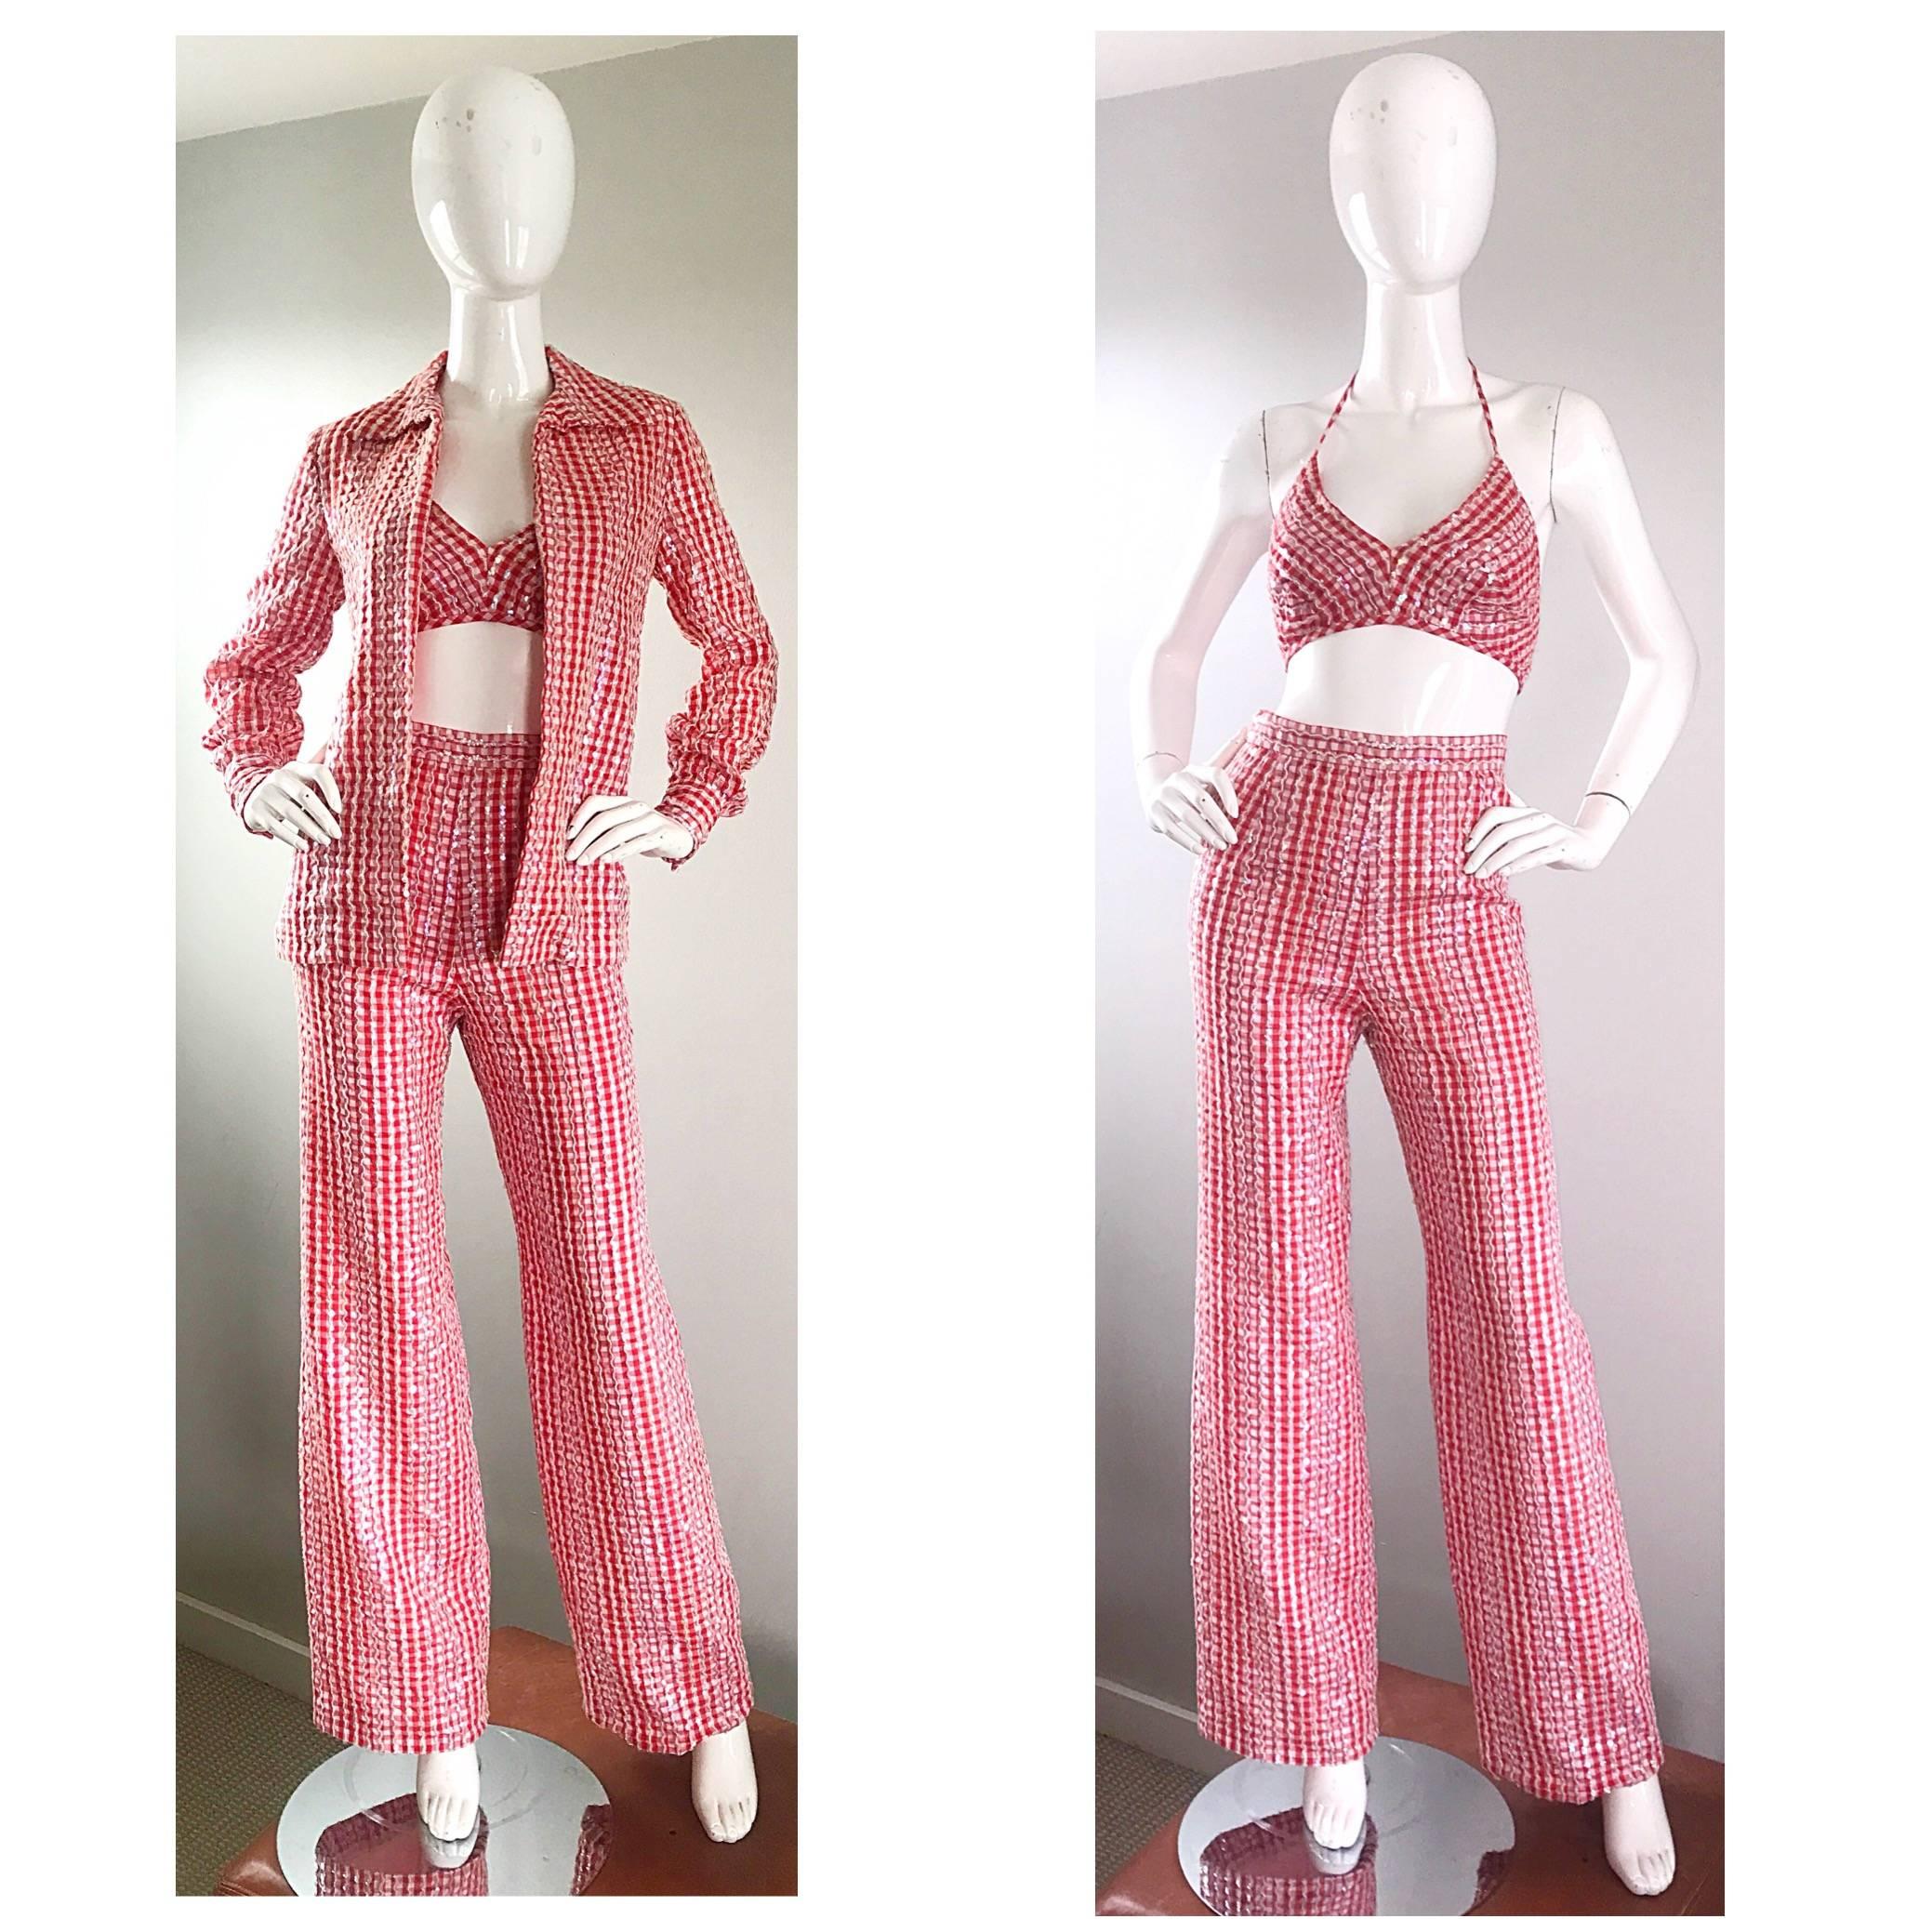 Rare 1970s ANTHONY MUTO for LILLIE RUBIN red and white gingham sequined three piece set! Features a cropped bra top, high waisted wide leg trousers, and a collared blouse. Thousands of hand-sewn clear iridescent sequins on a nice cotton throughout.